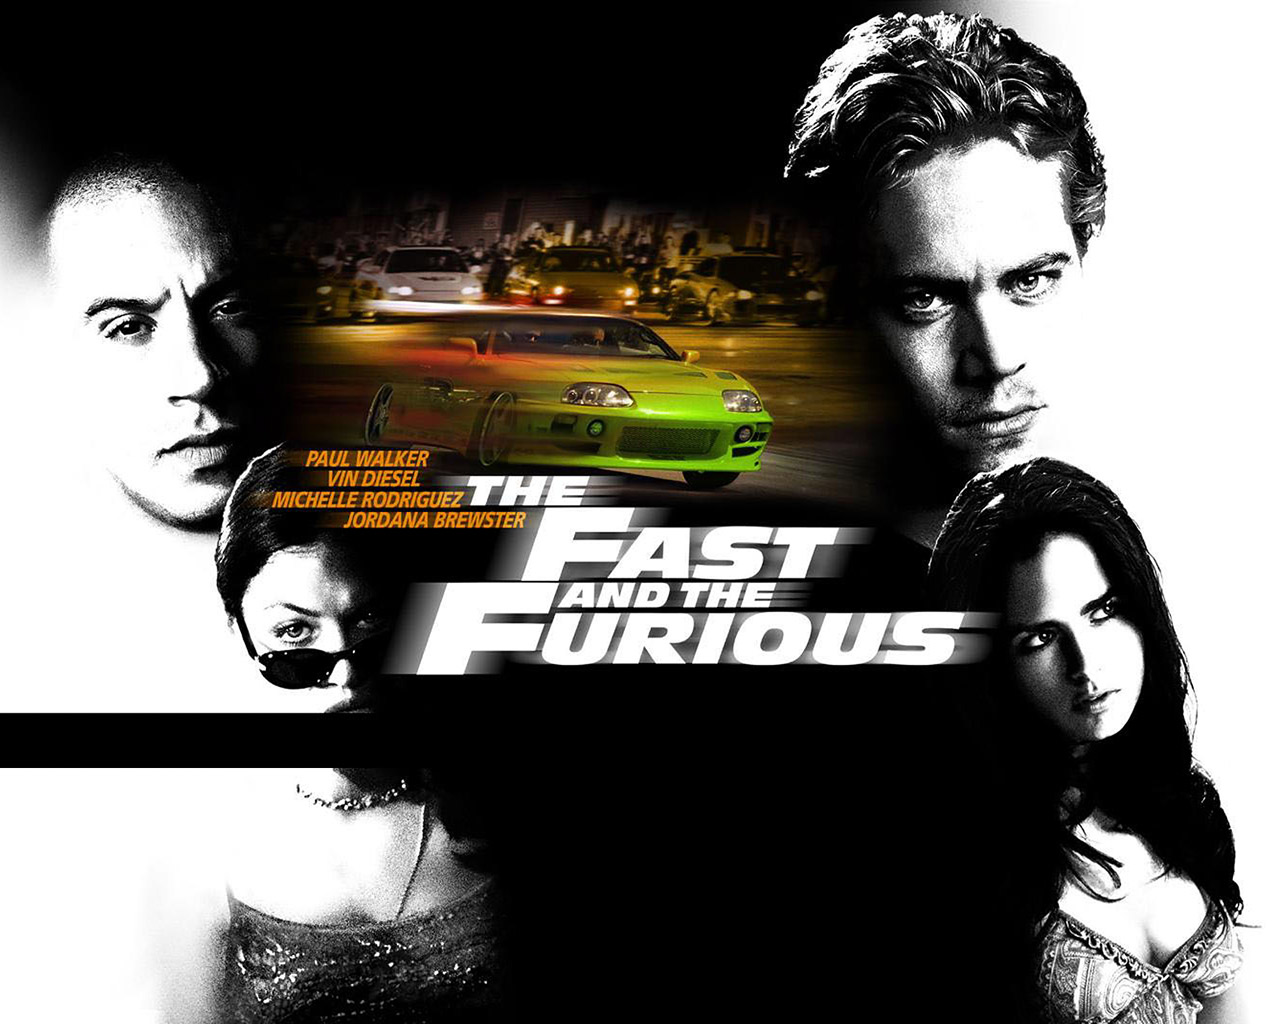 A Look Back: The Fast and the Furious (2001) - The Workprint1280 x 1024